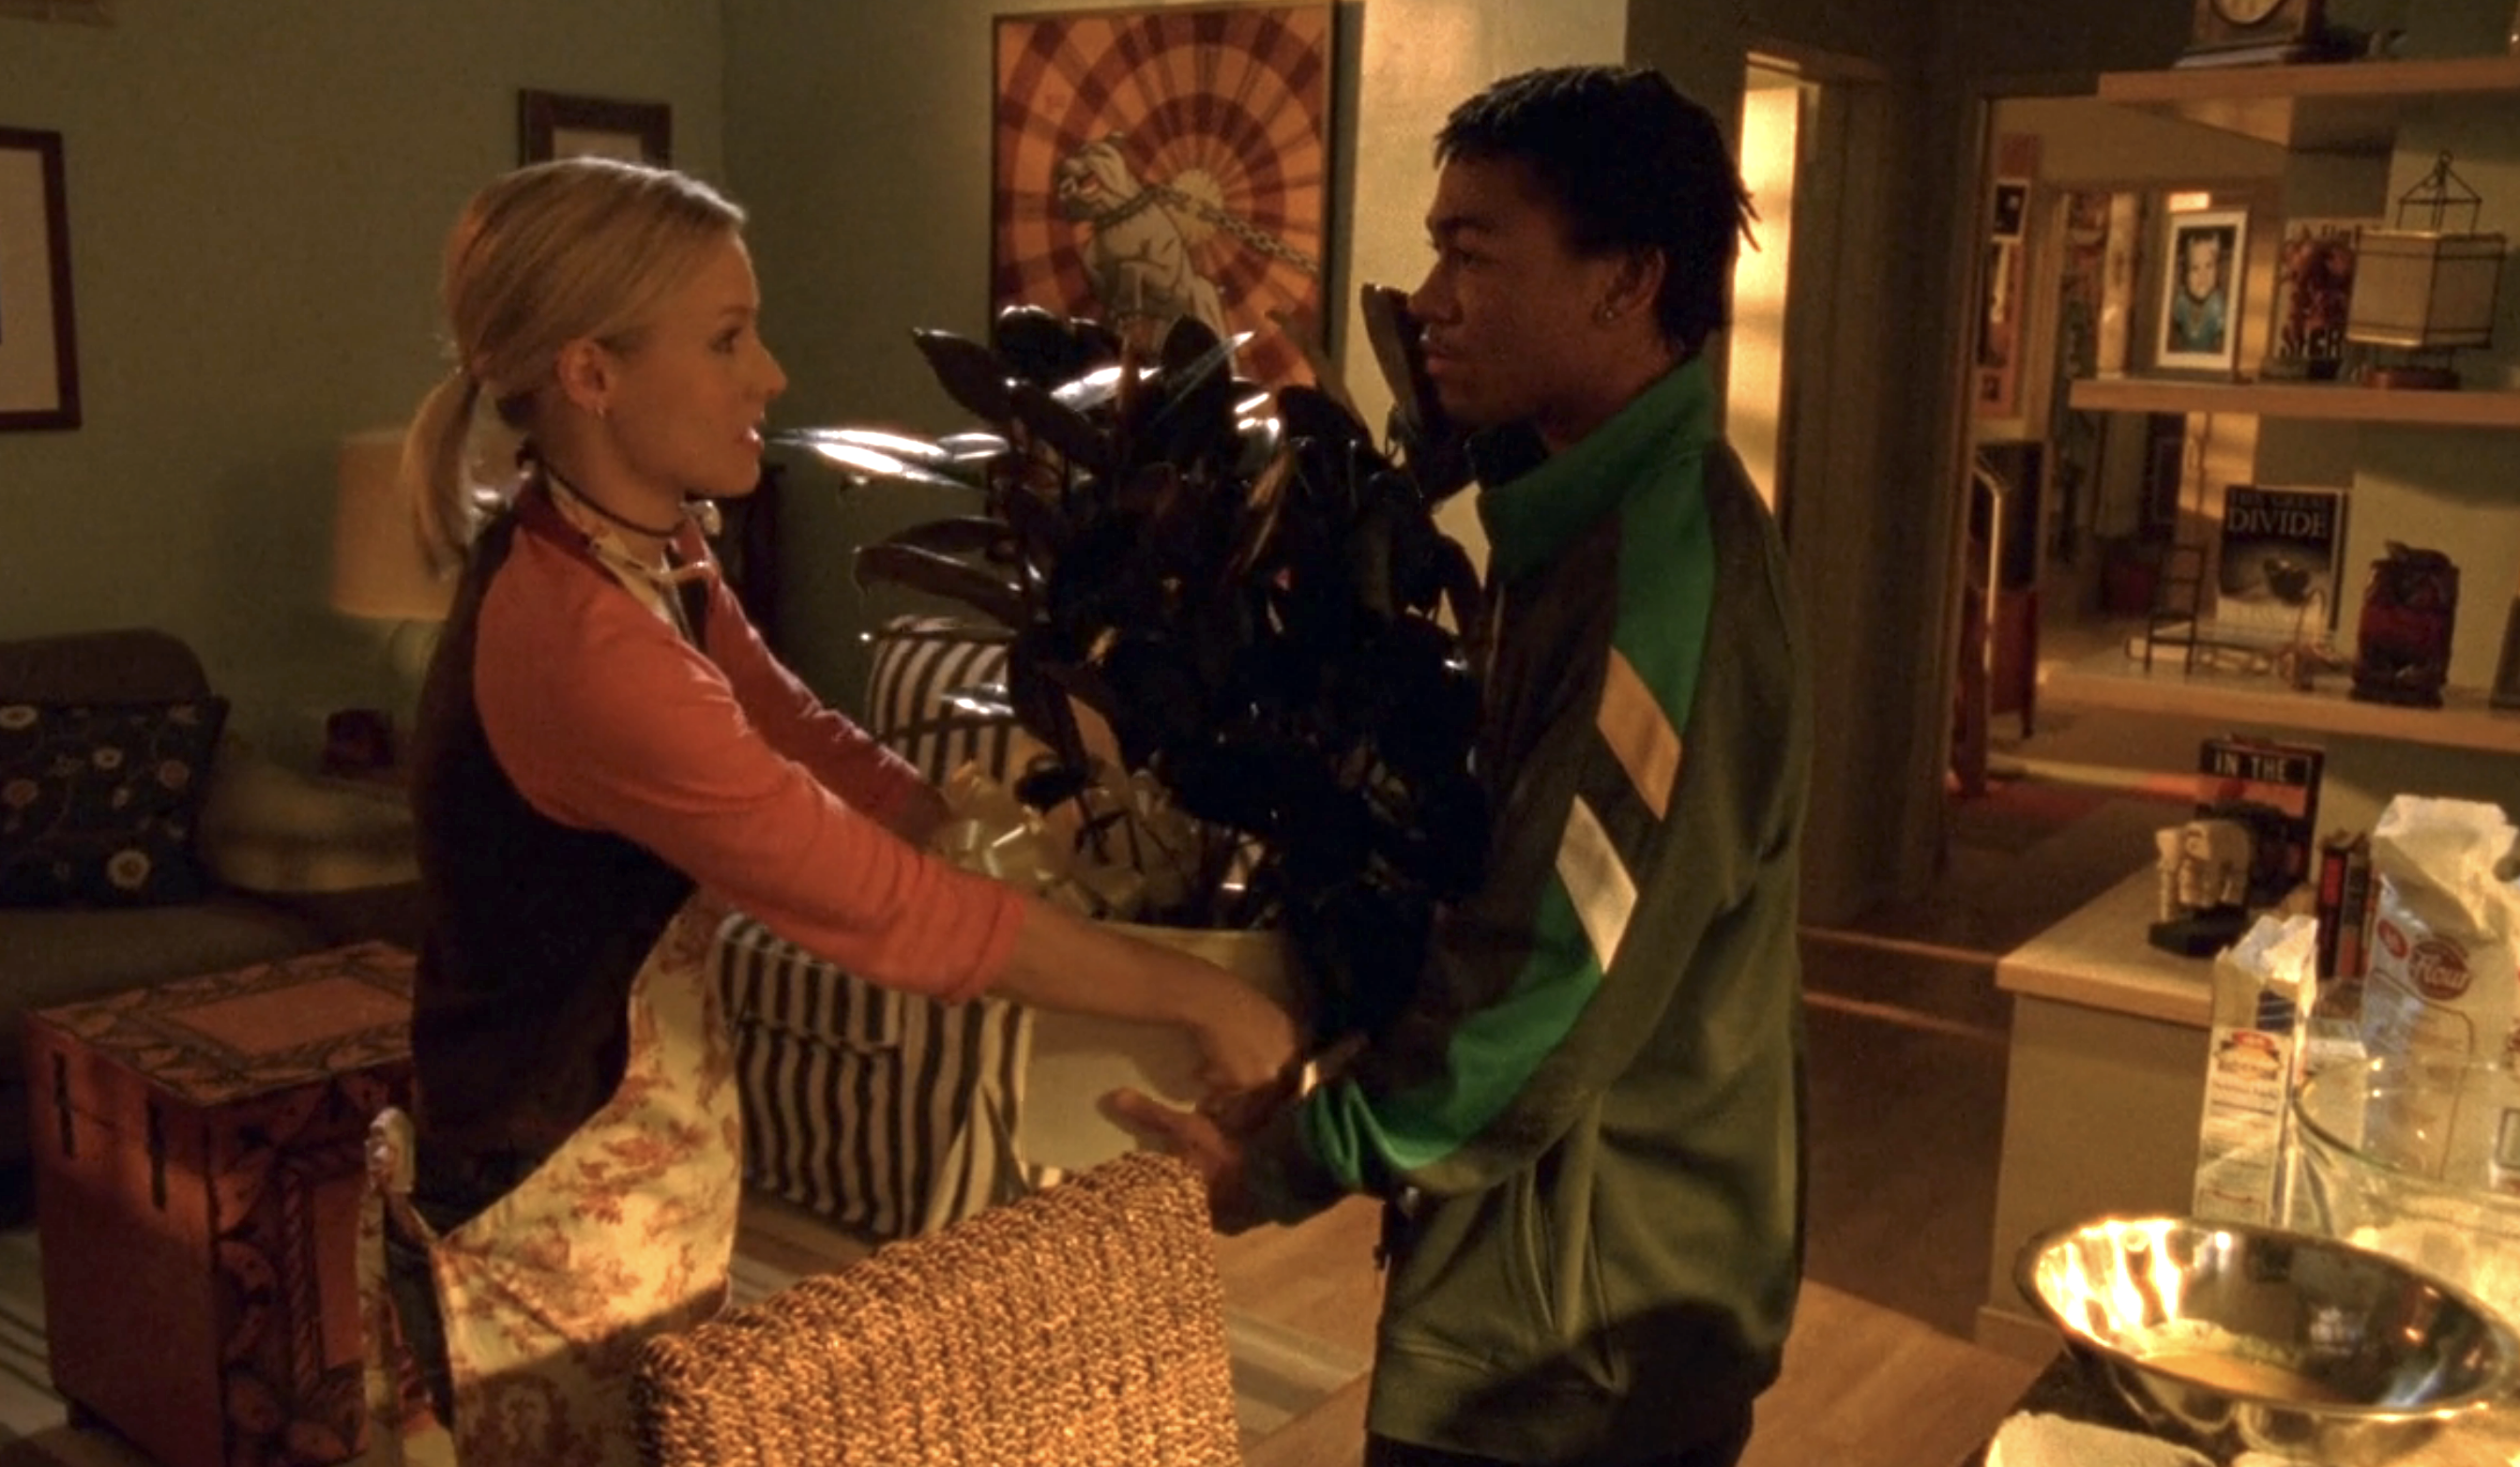 Screenshot from S1E16 of Veronica Mars. Veronica is handing Wallaca a big potten houseplant. They're in her house and she is wearing an apron. He is wearing his green and yellow Neptune High jacket.